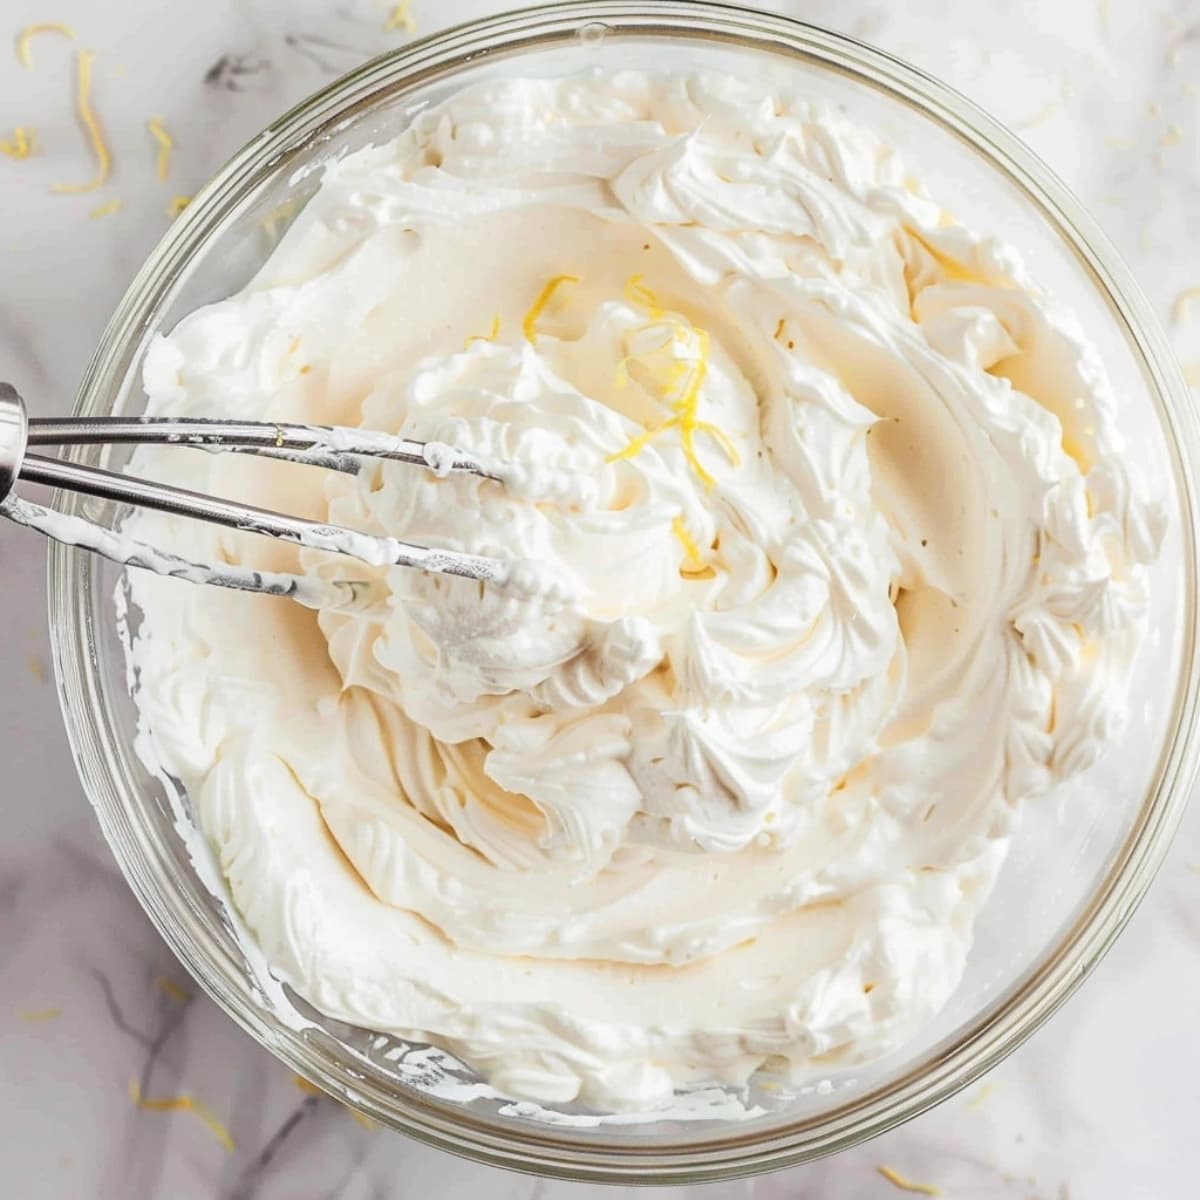 Whipped cream in a glass bowl with lemon zest.